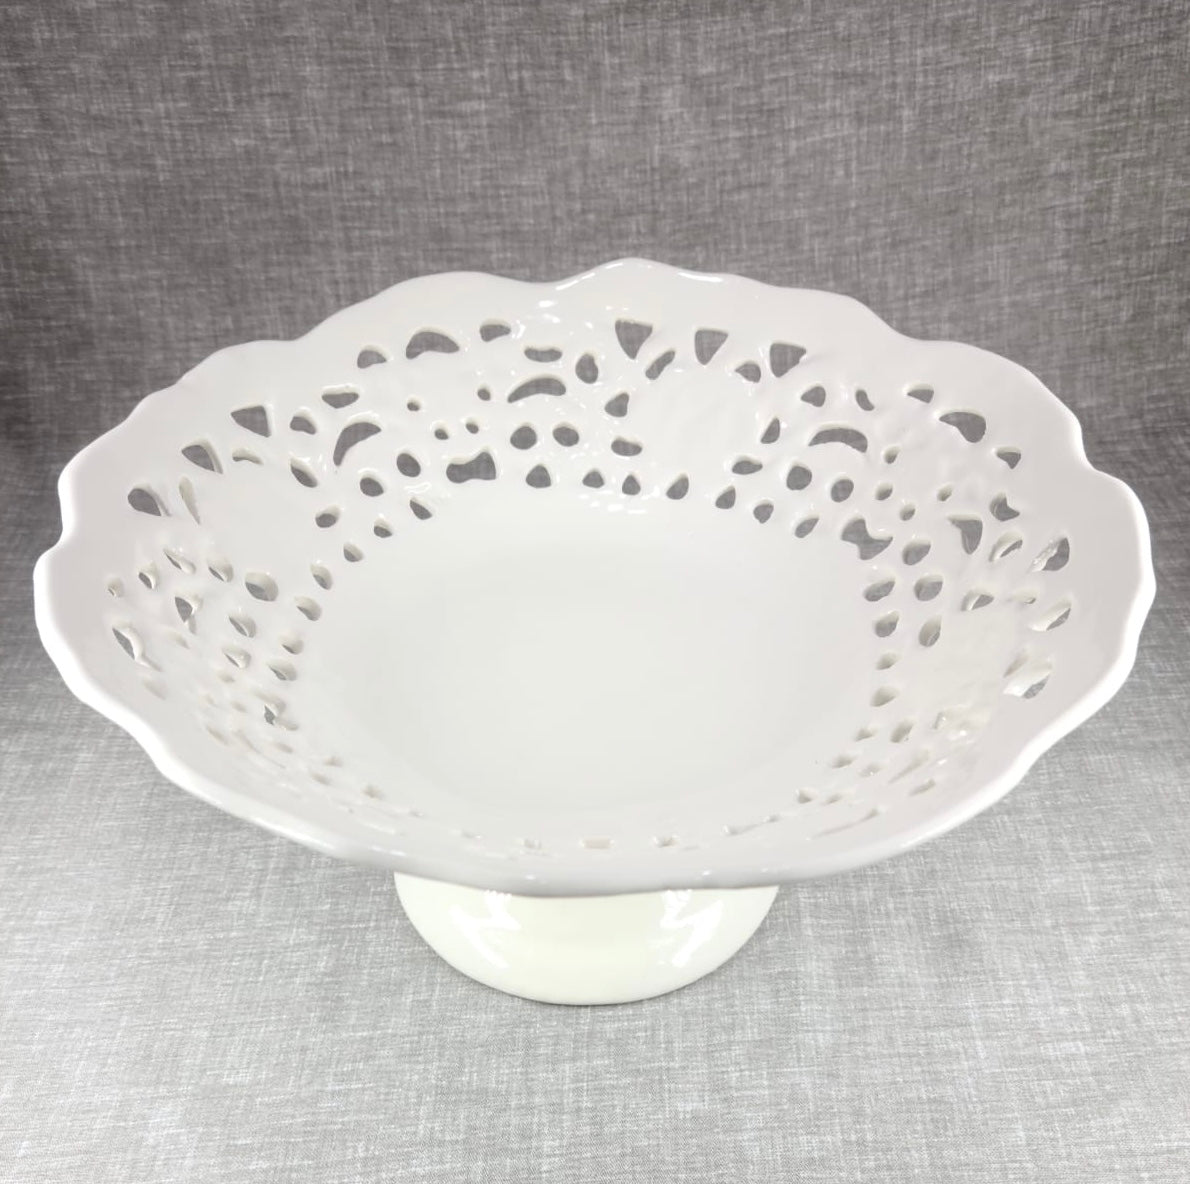 White Ceramic Bowl with Stand - HighTouch 